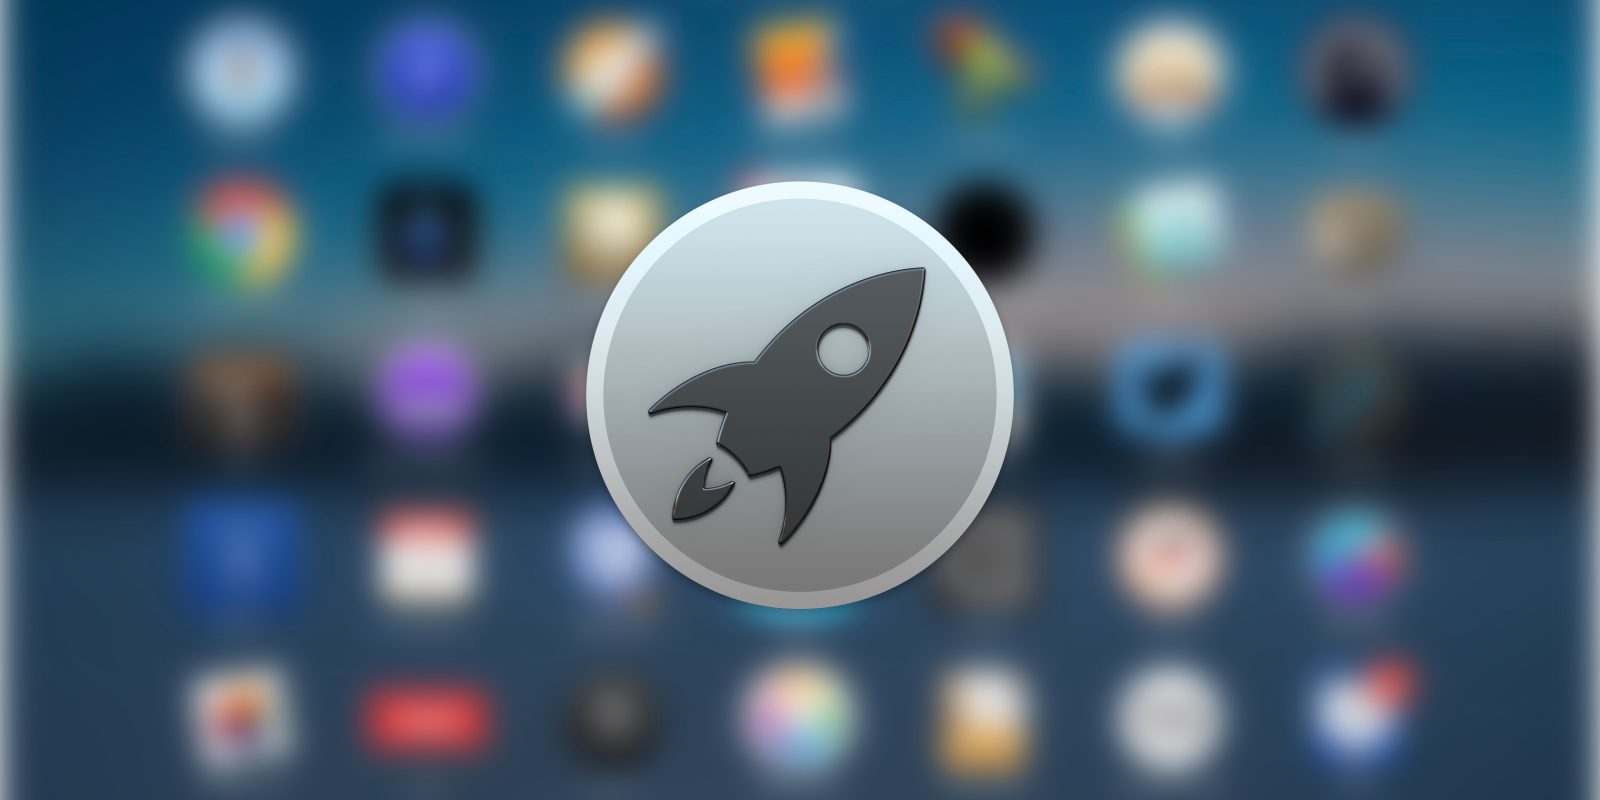 Use Launchpad to view and open apps on Mac - Apple Support